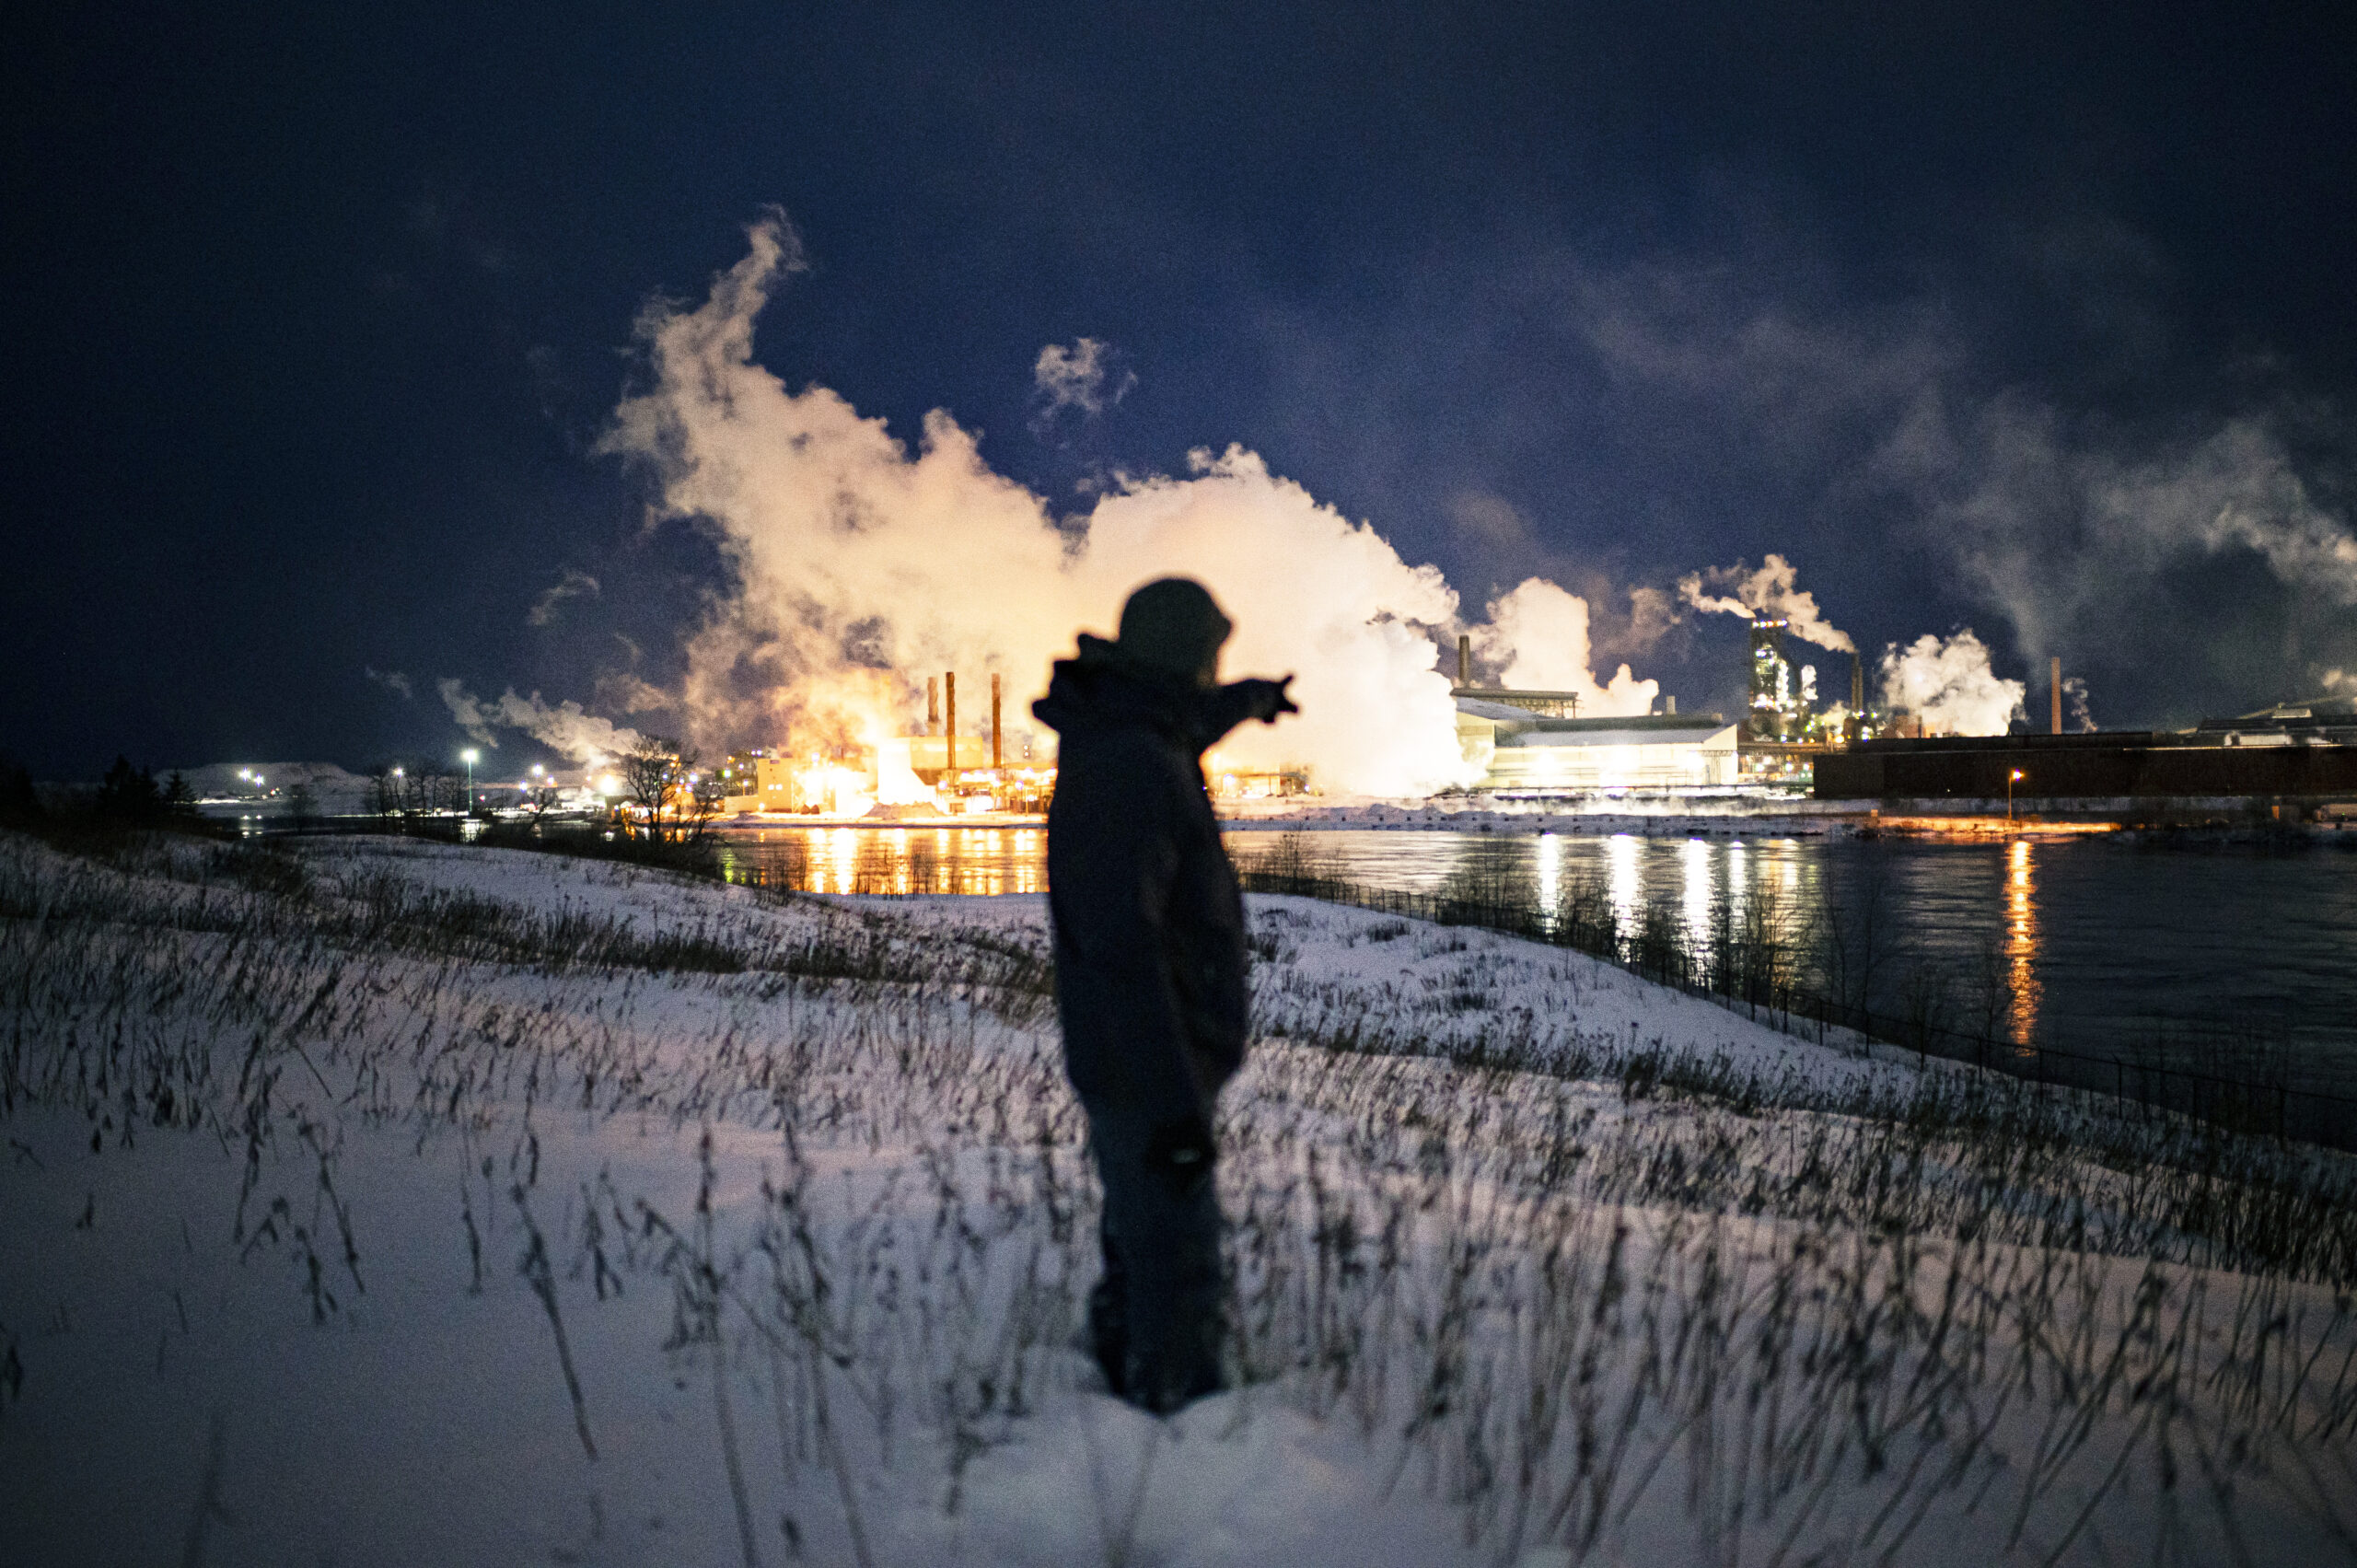 The silhouette of a person standing in snow by a river points to steam rising from the Algoma Steel plant at night. 